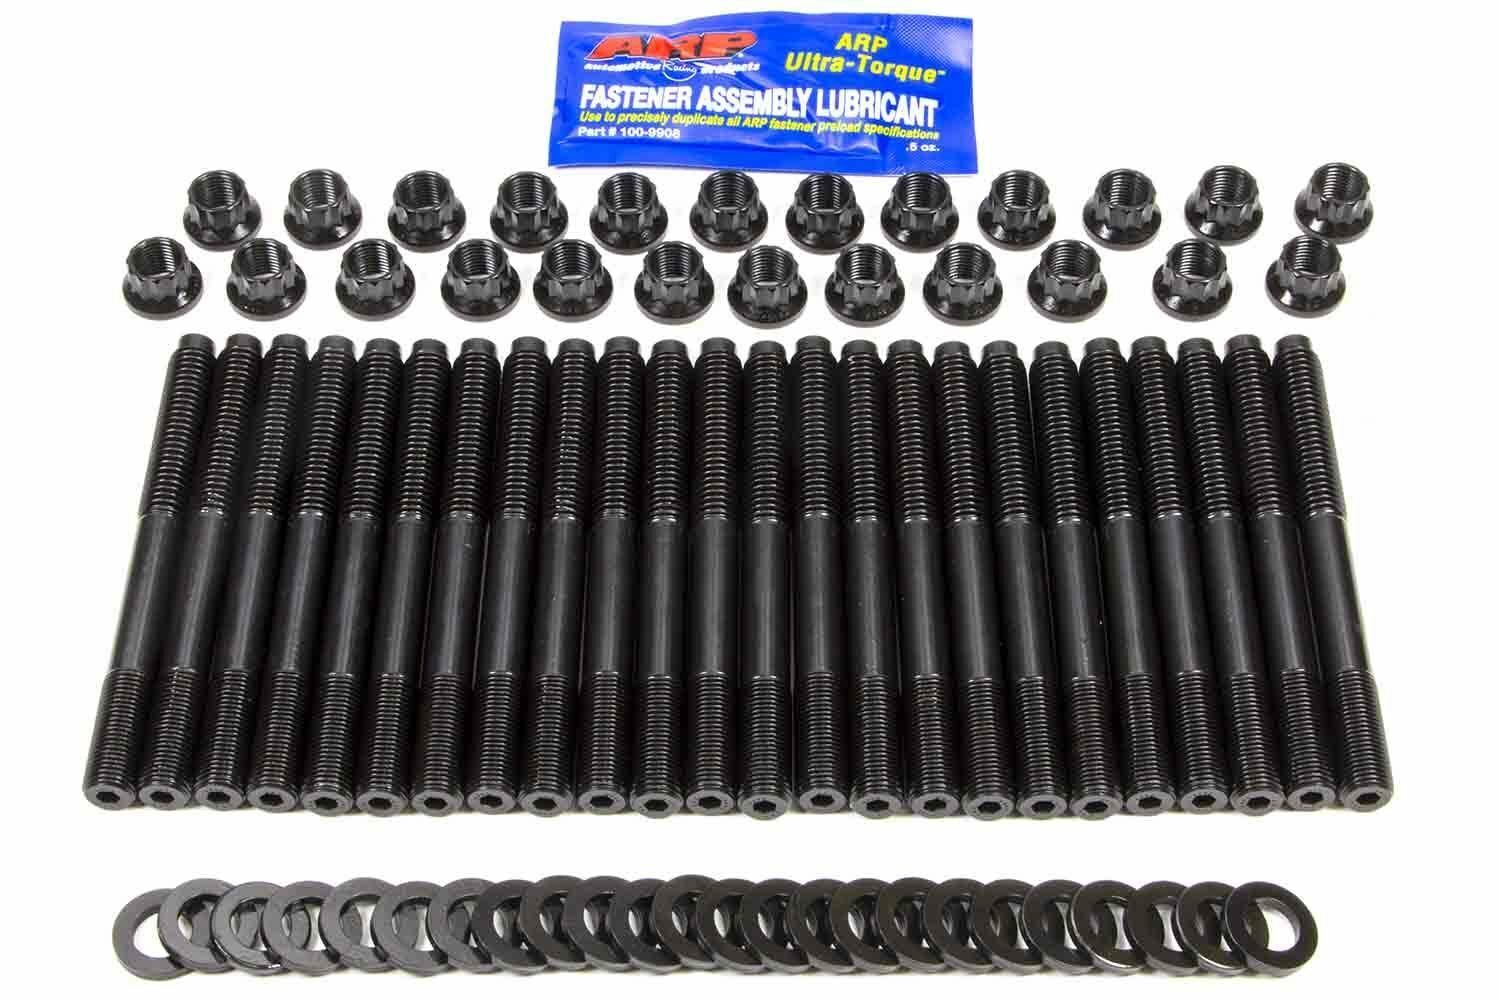 Cylinder Head Stud Kit - 12 Black Oxide Free Shipping Cheap Bargain Gift unisex Point Nuts ARP2000